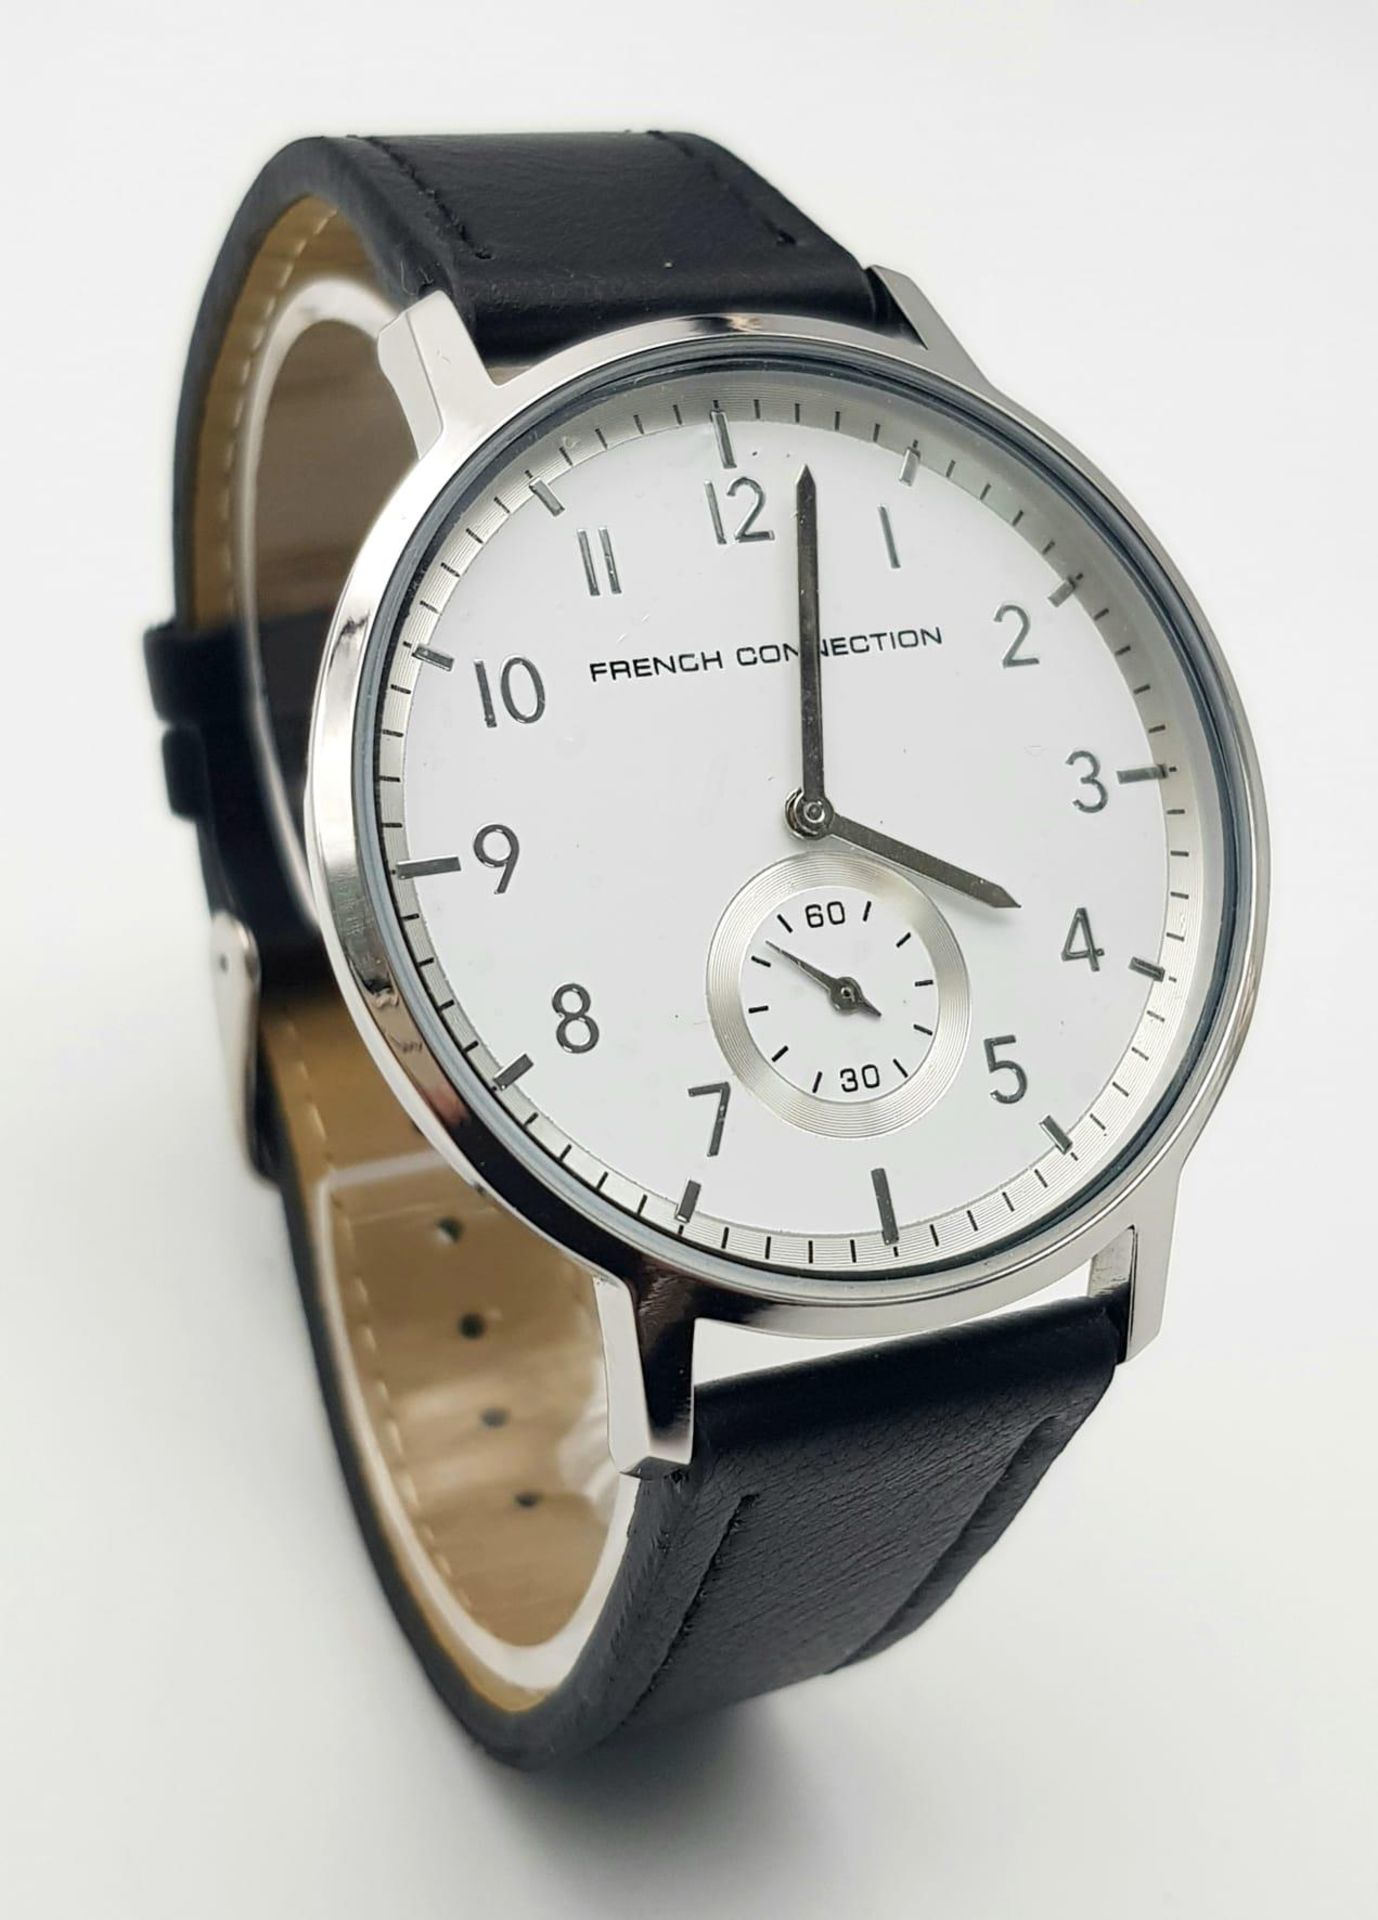 An Unworn Men’s Subsidiary Dial Quartz Watch by French Connection. 44mm Including Crown. Full